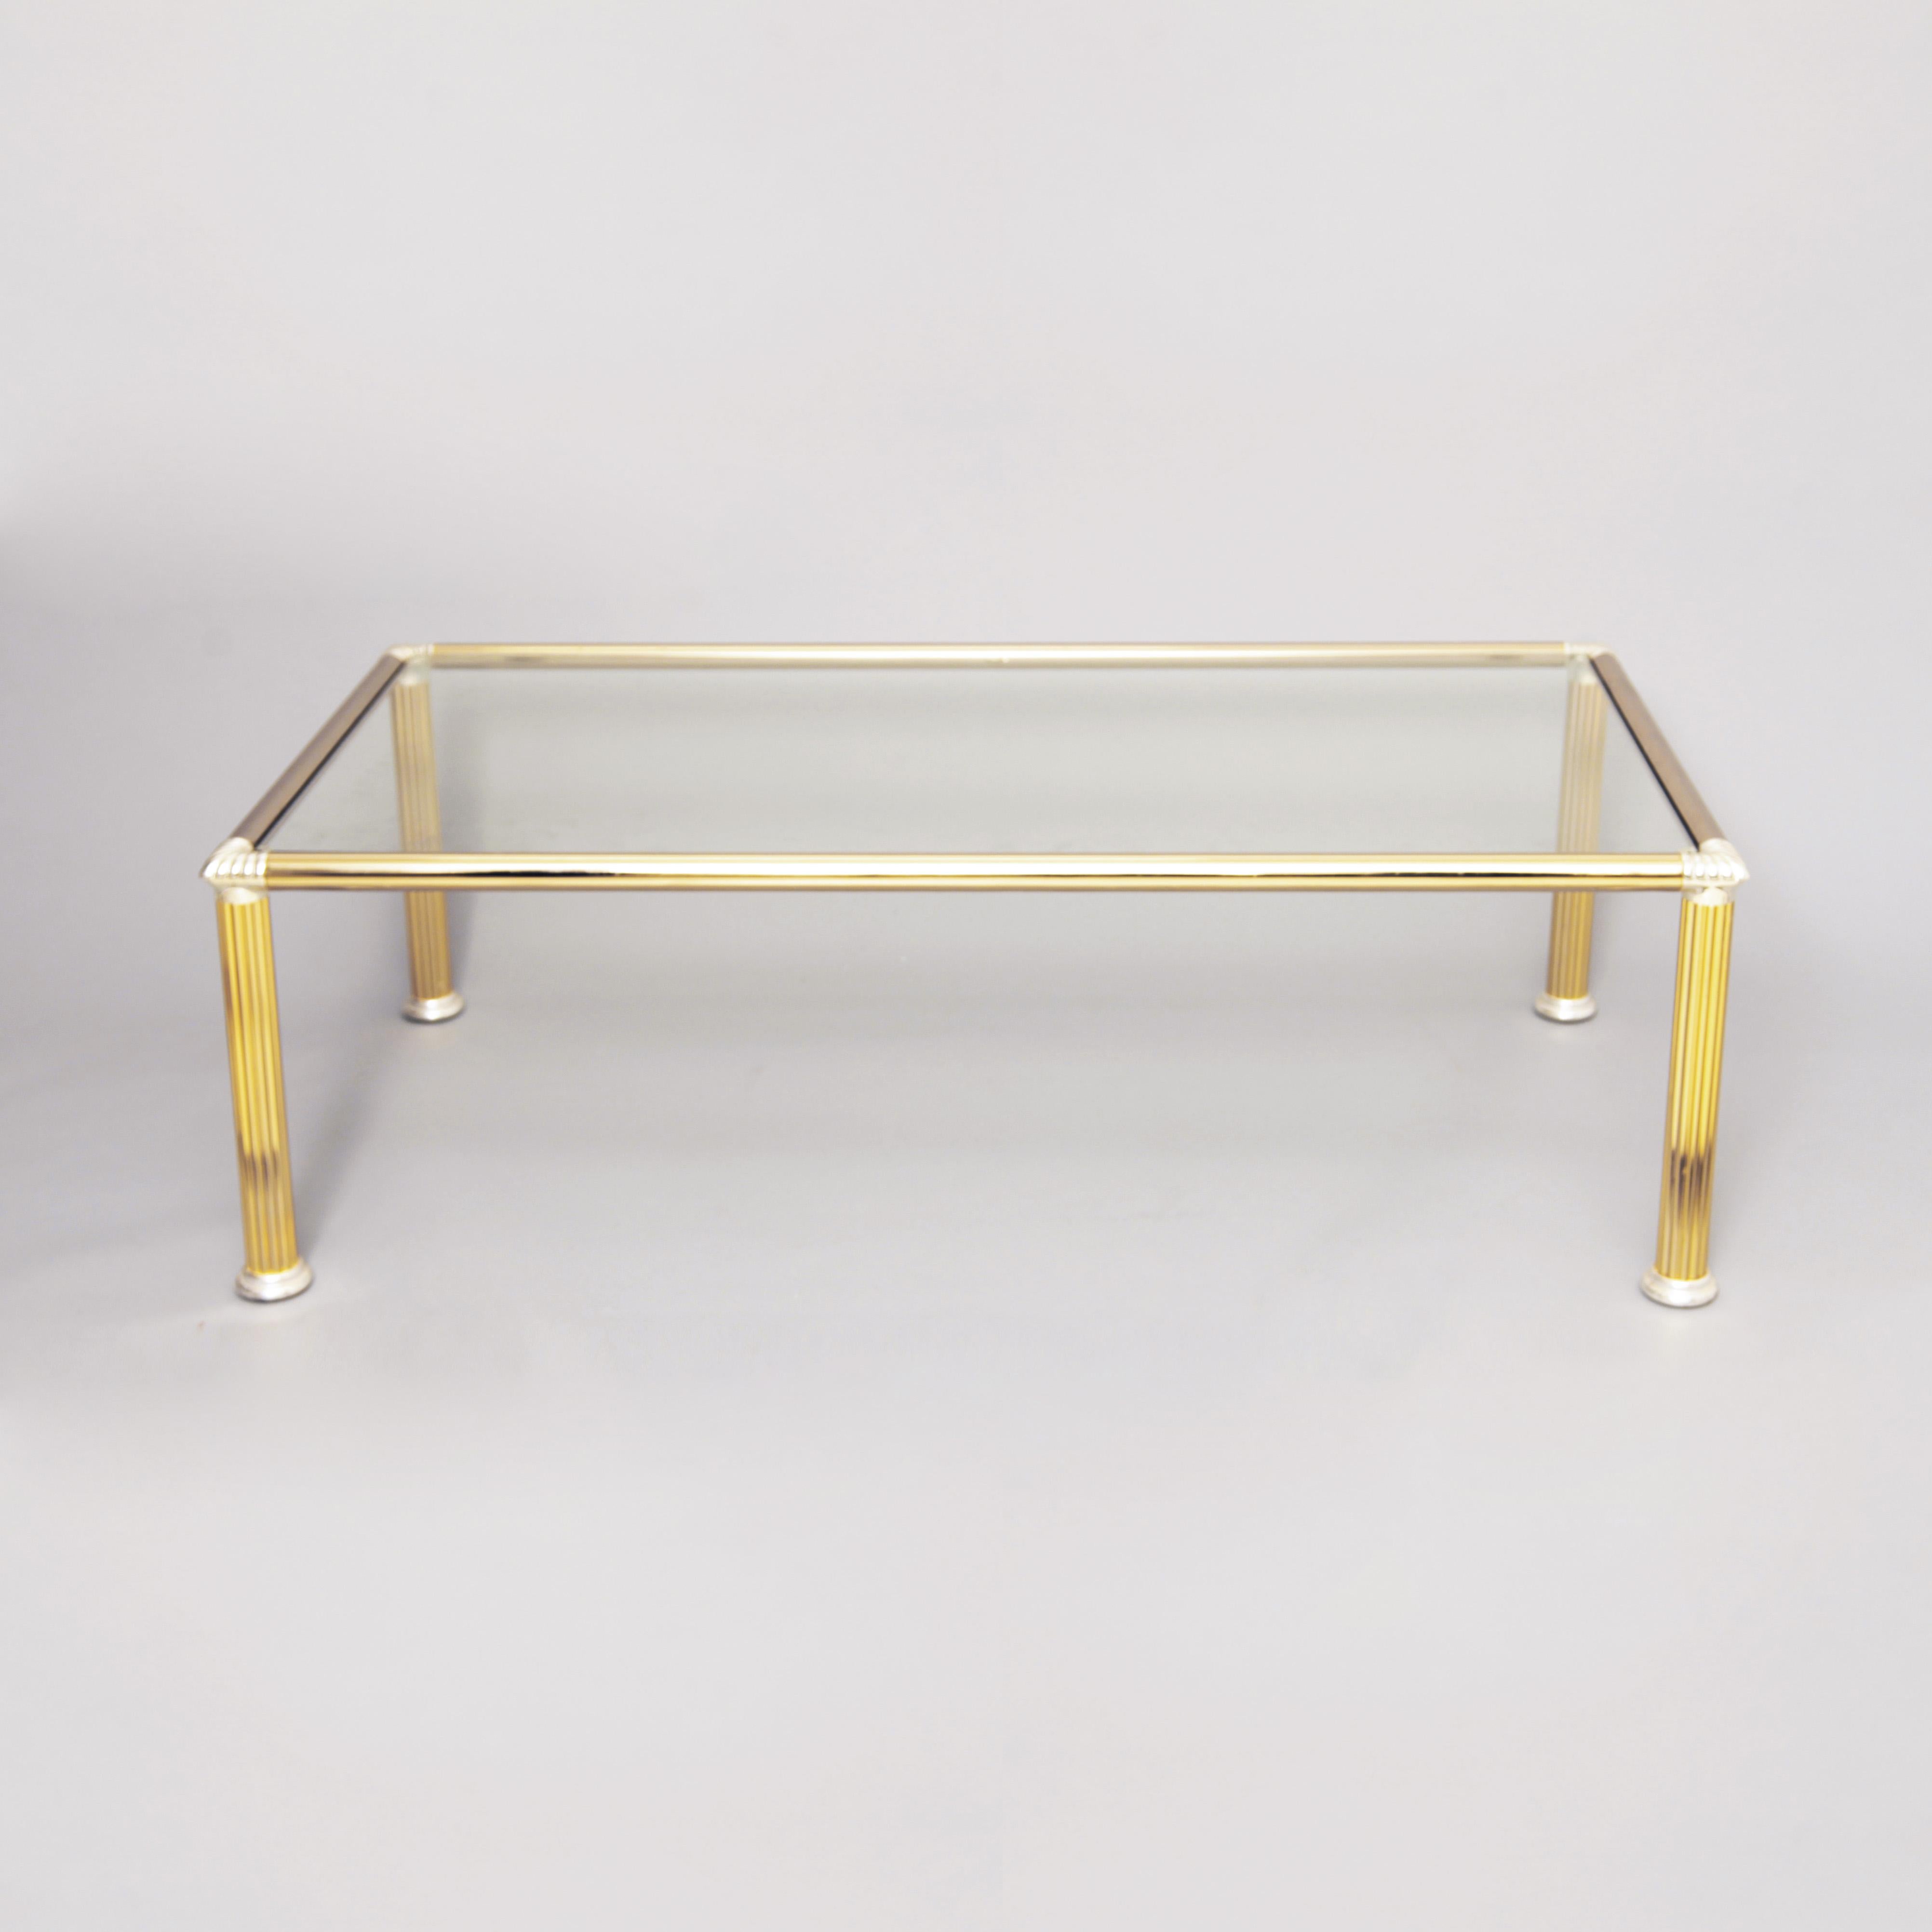 Chrome and brass rectangular coffee table with column shaped legs and corners. Clear glass top.

Please contact us for international quotes.

CREATOR: Unknown

PLACE OF ORIGIN: Italy

DATE OF MANUFACTURE: c. 1970's

PERIOD: 1970 -